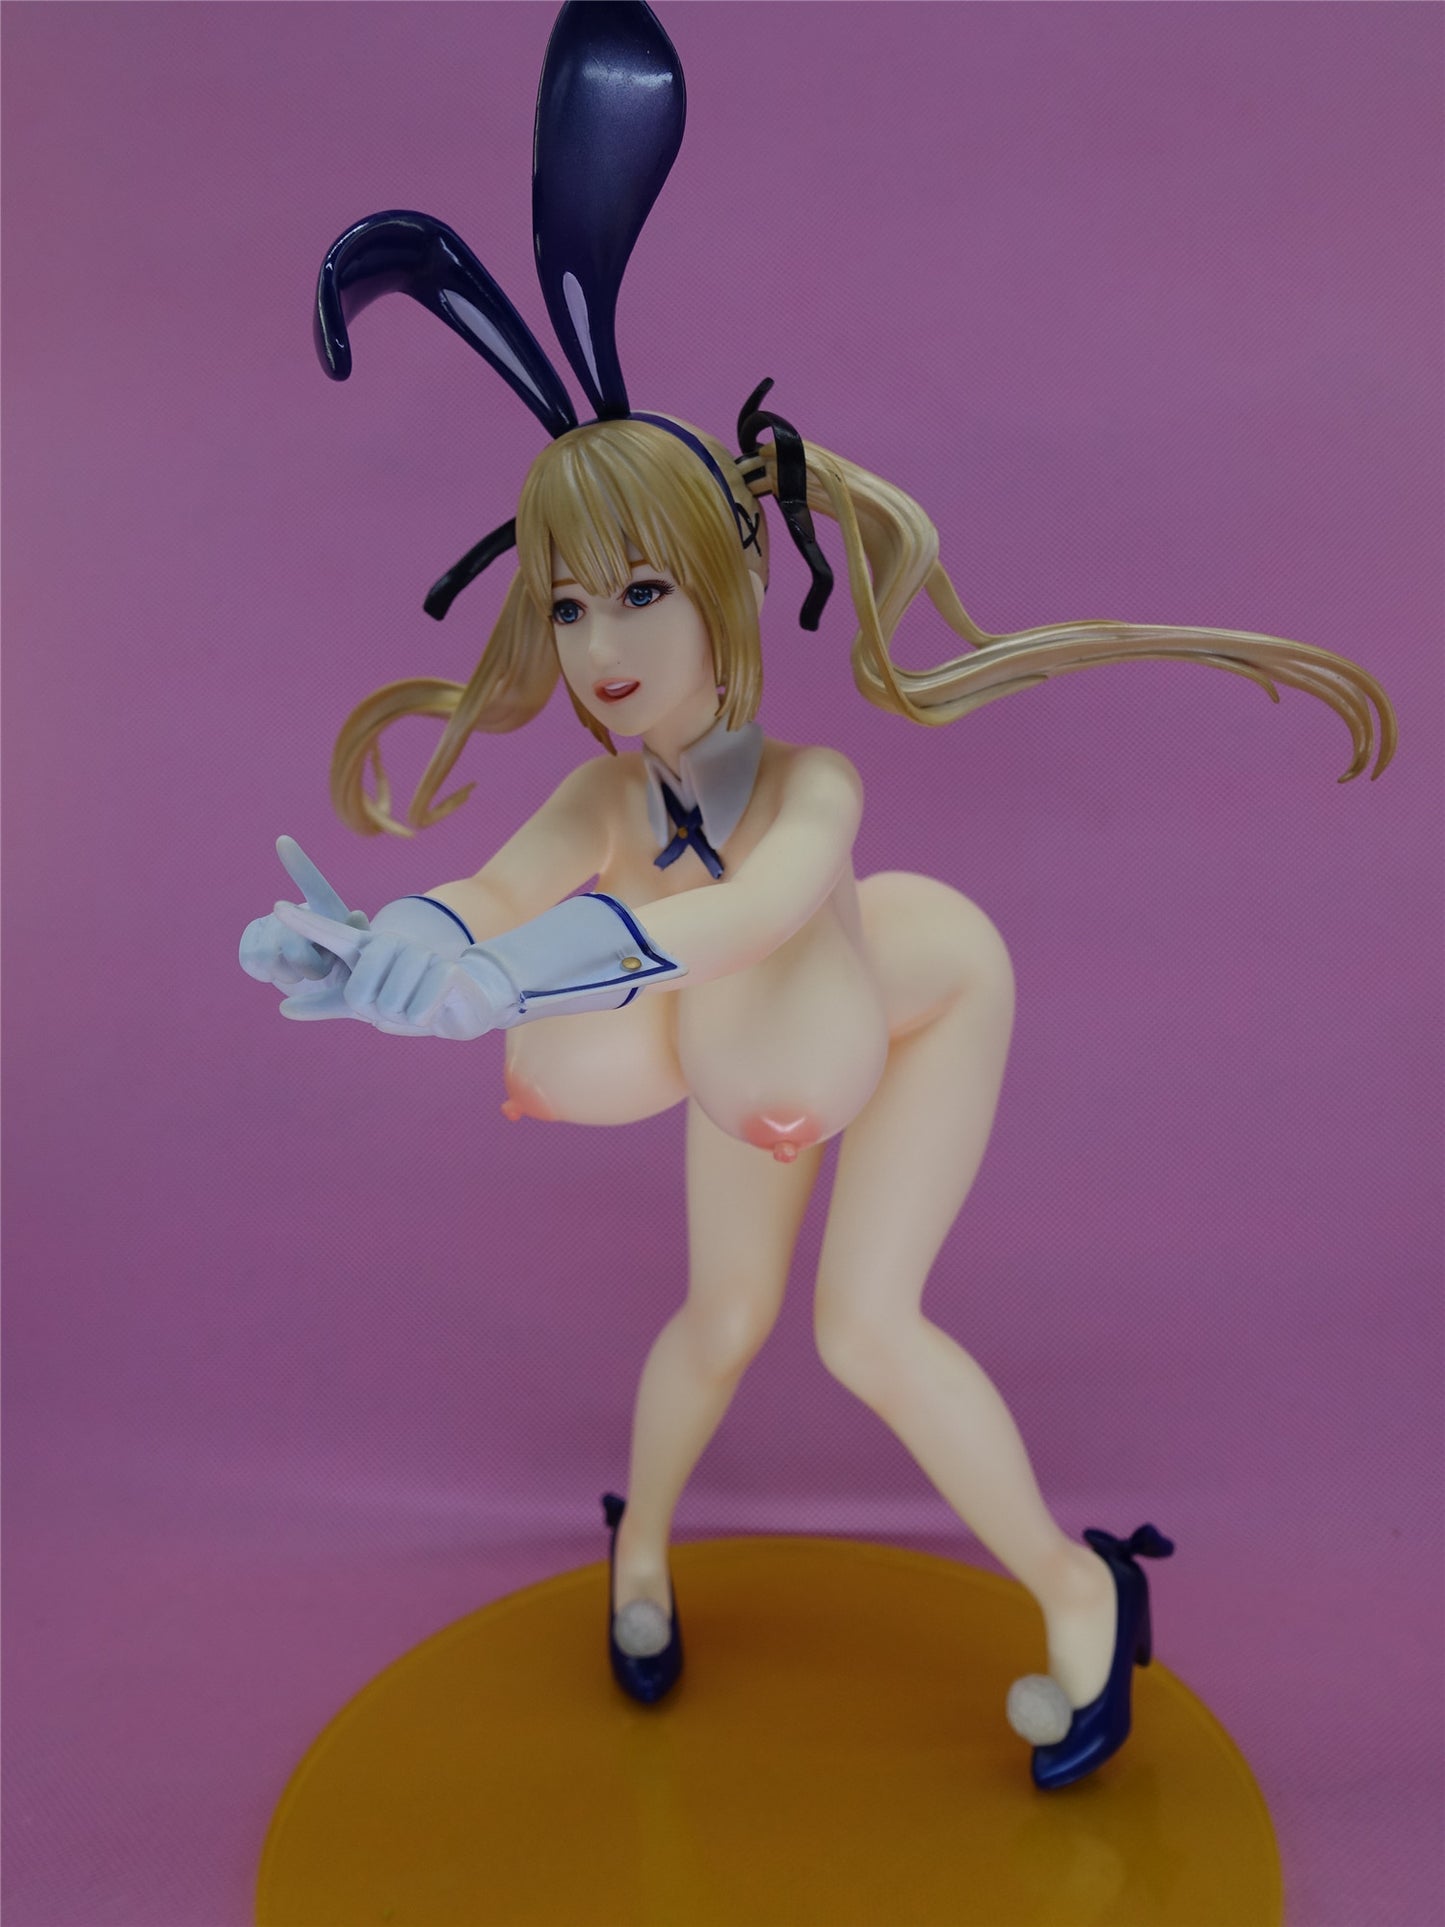 Dead Or Alive Xtreme 3: Marie Rose huge breast 1/4 nude anime figure